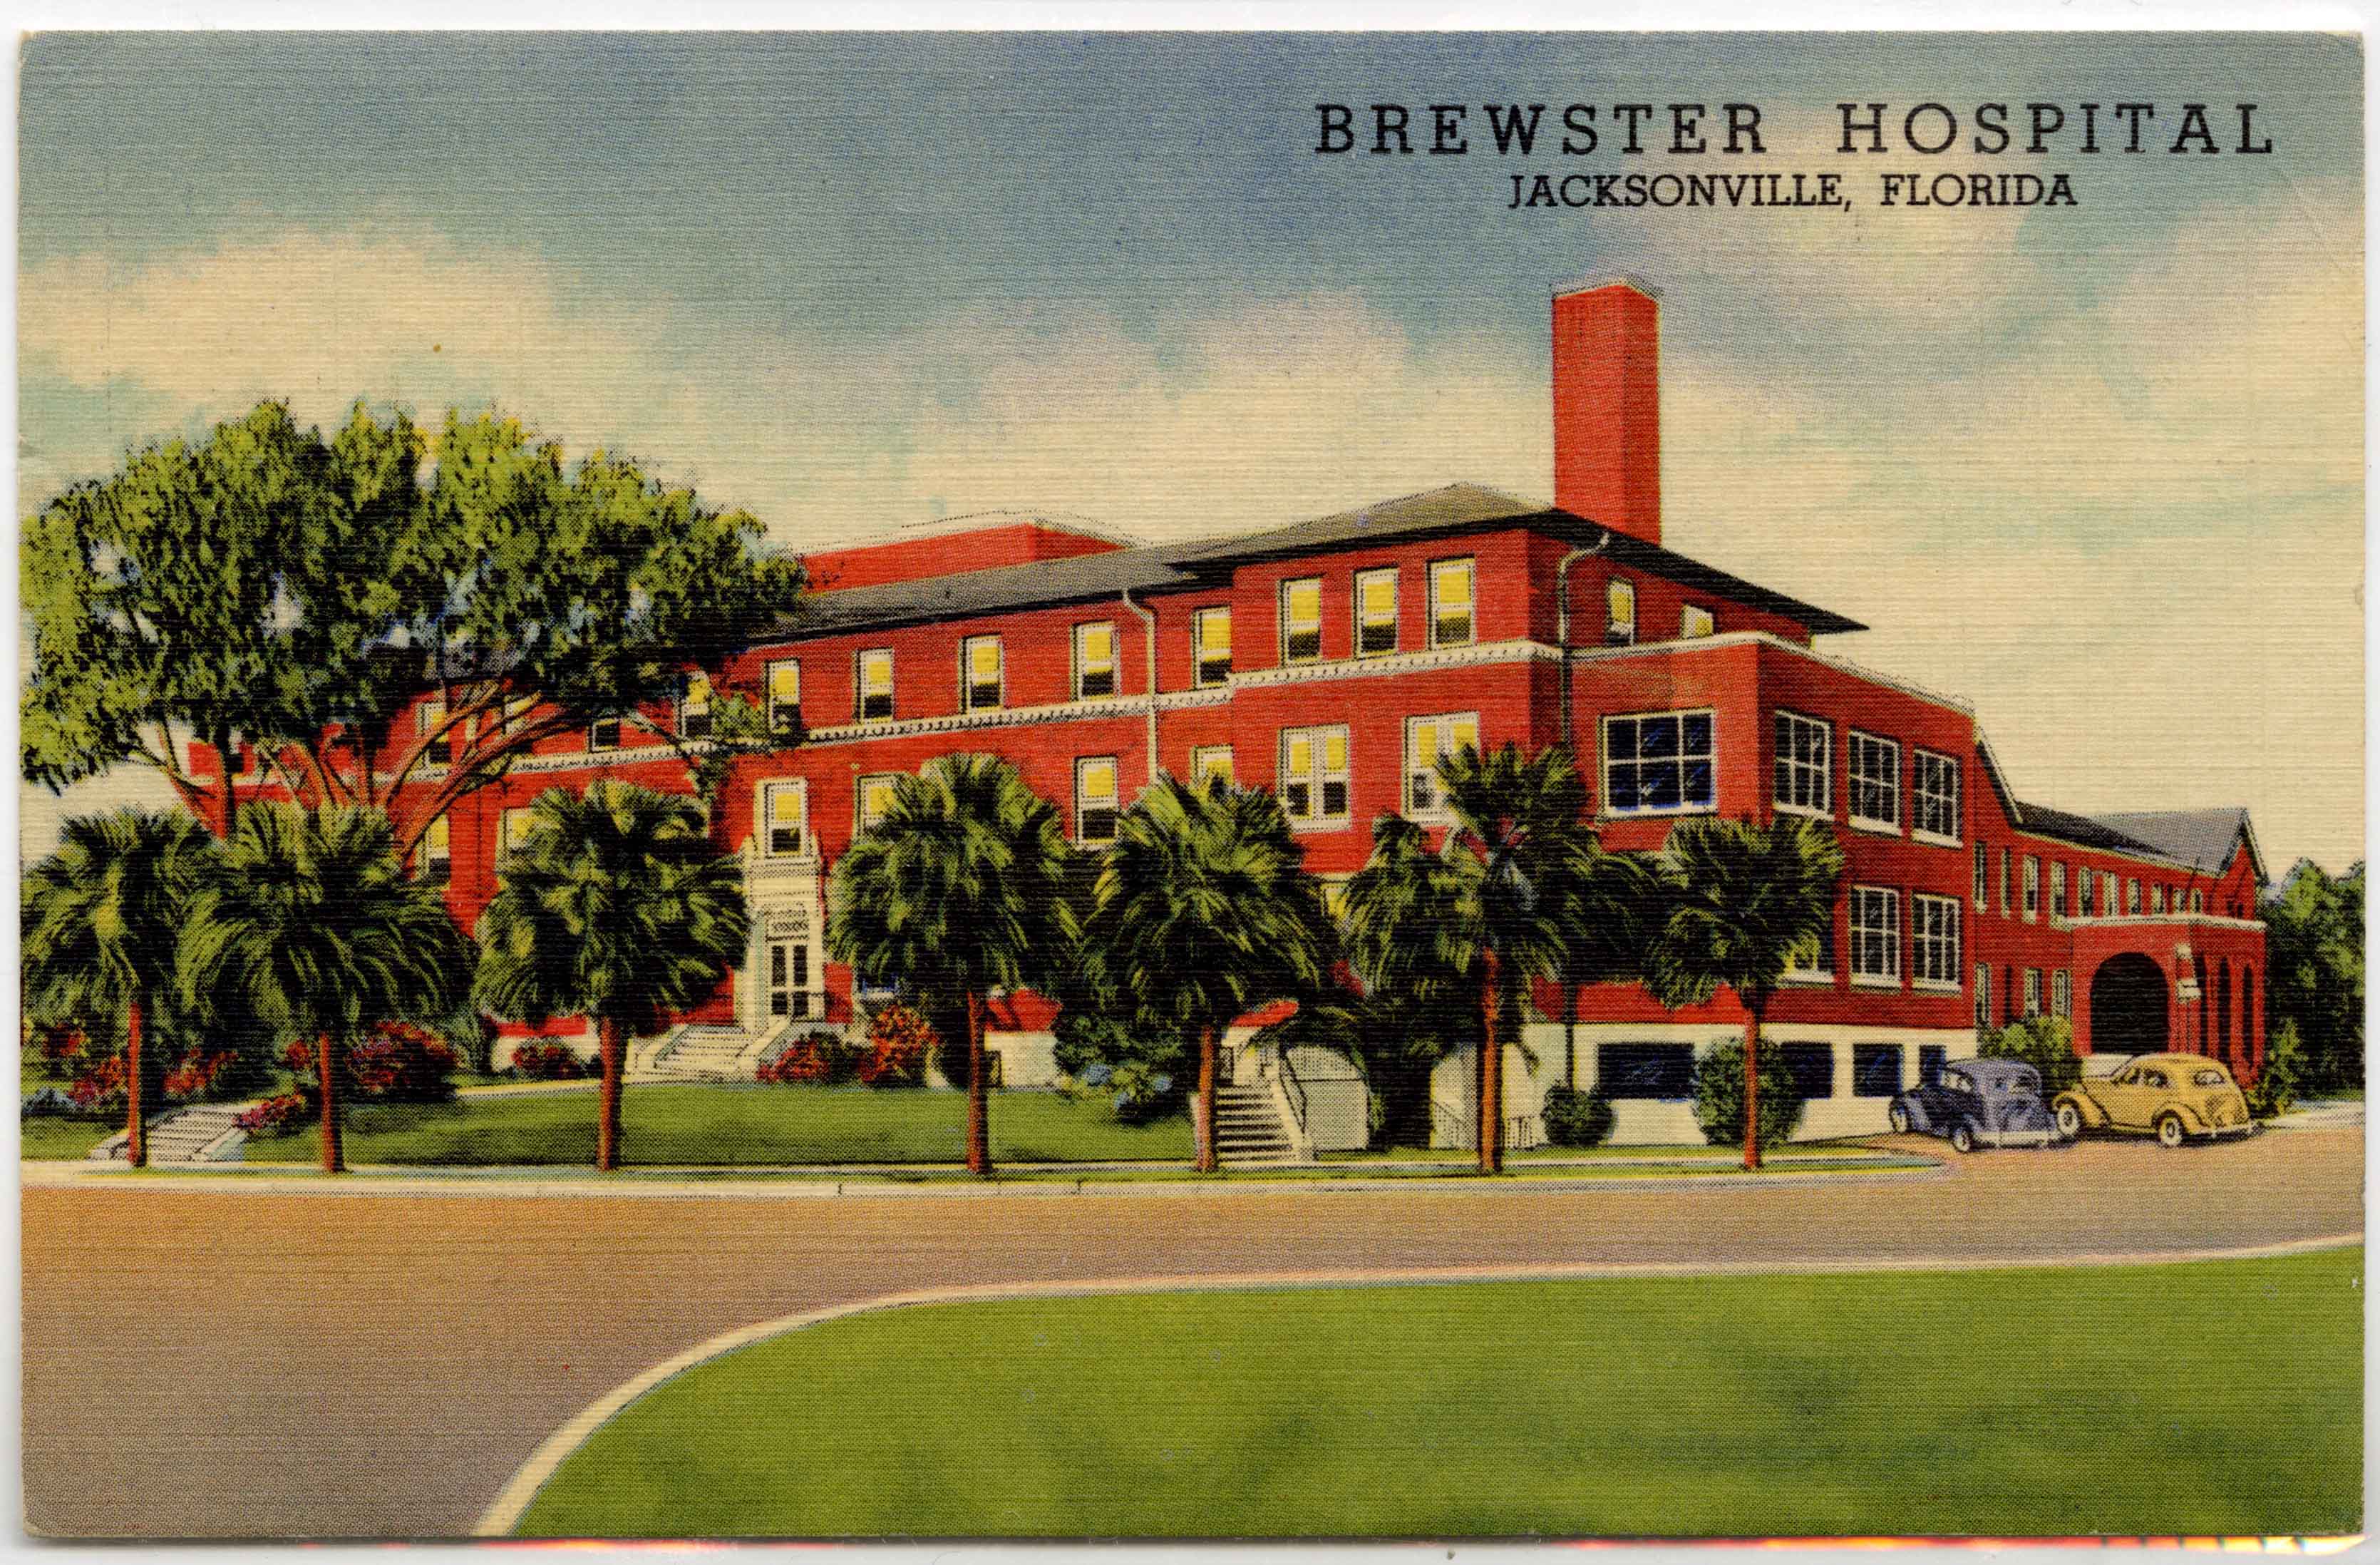 Postcard with image of Brewster Hospital